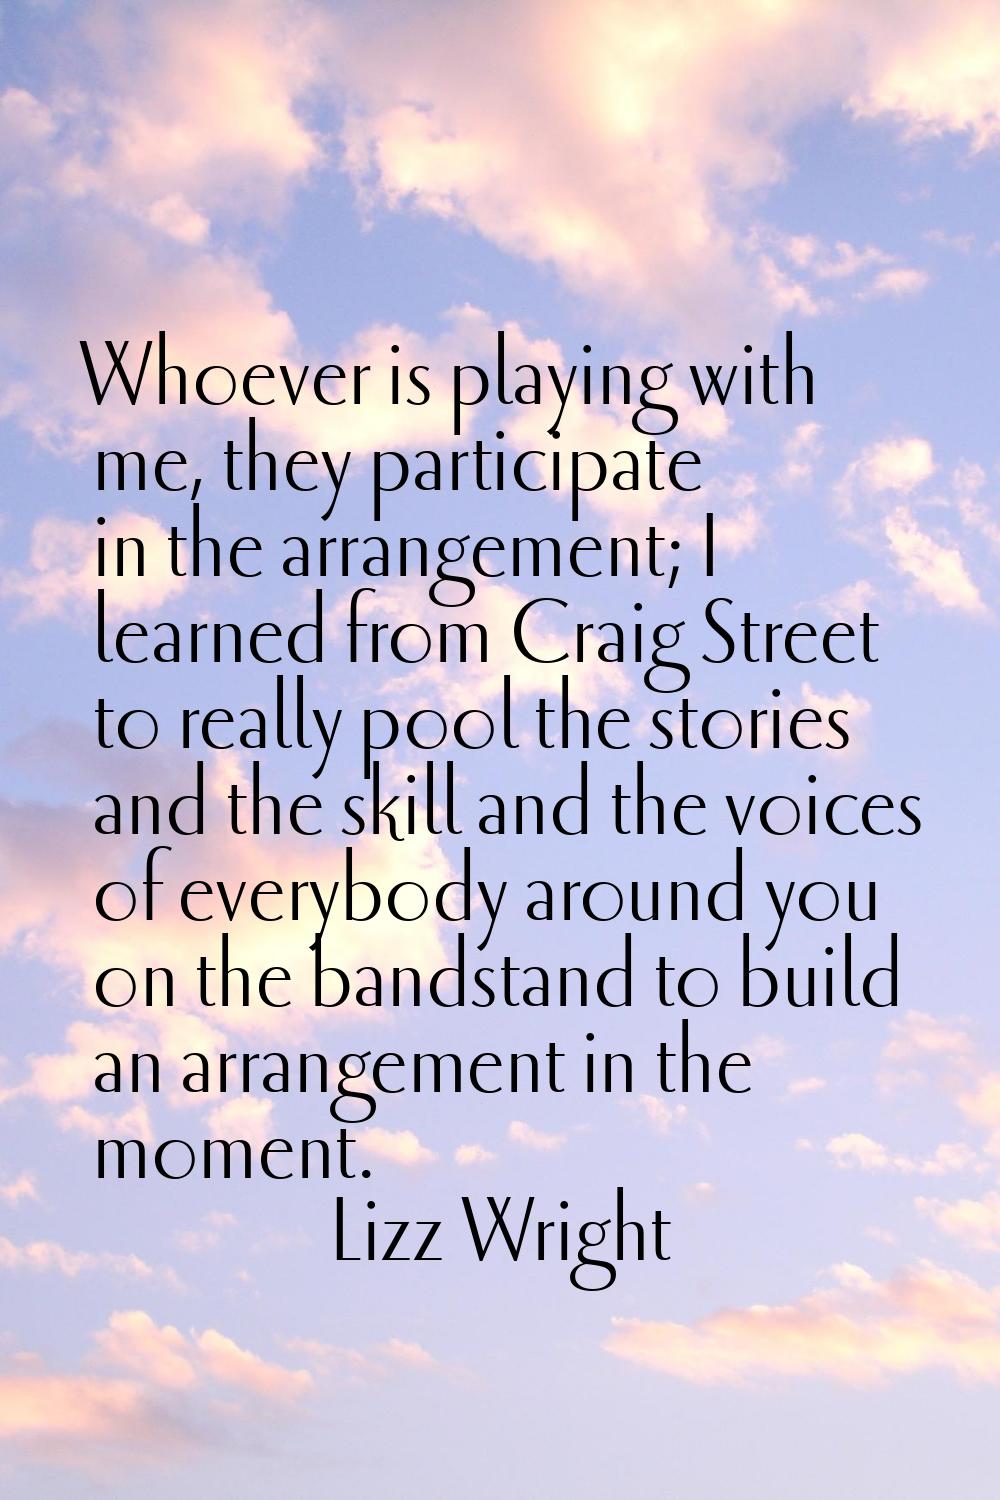 Whoever is playing with me, they participate in the arrangement; I learned from Craig Street to rea